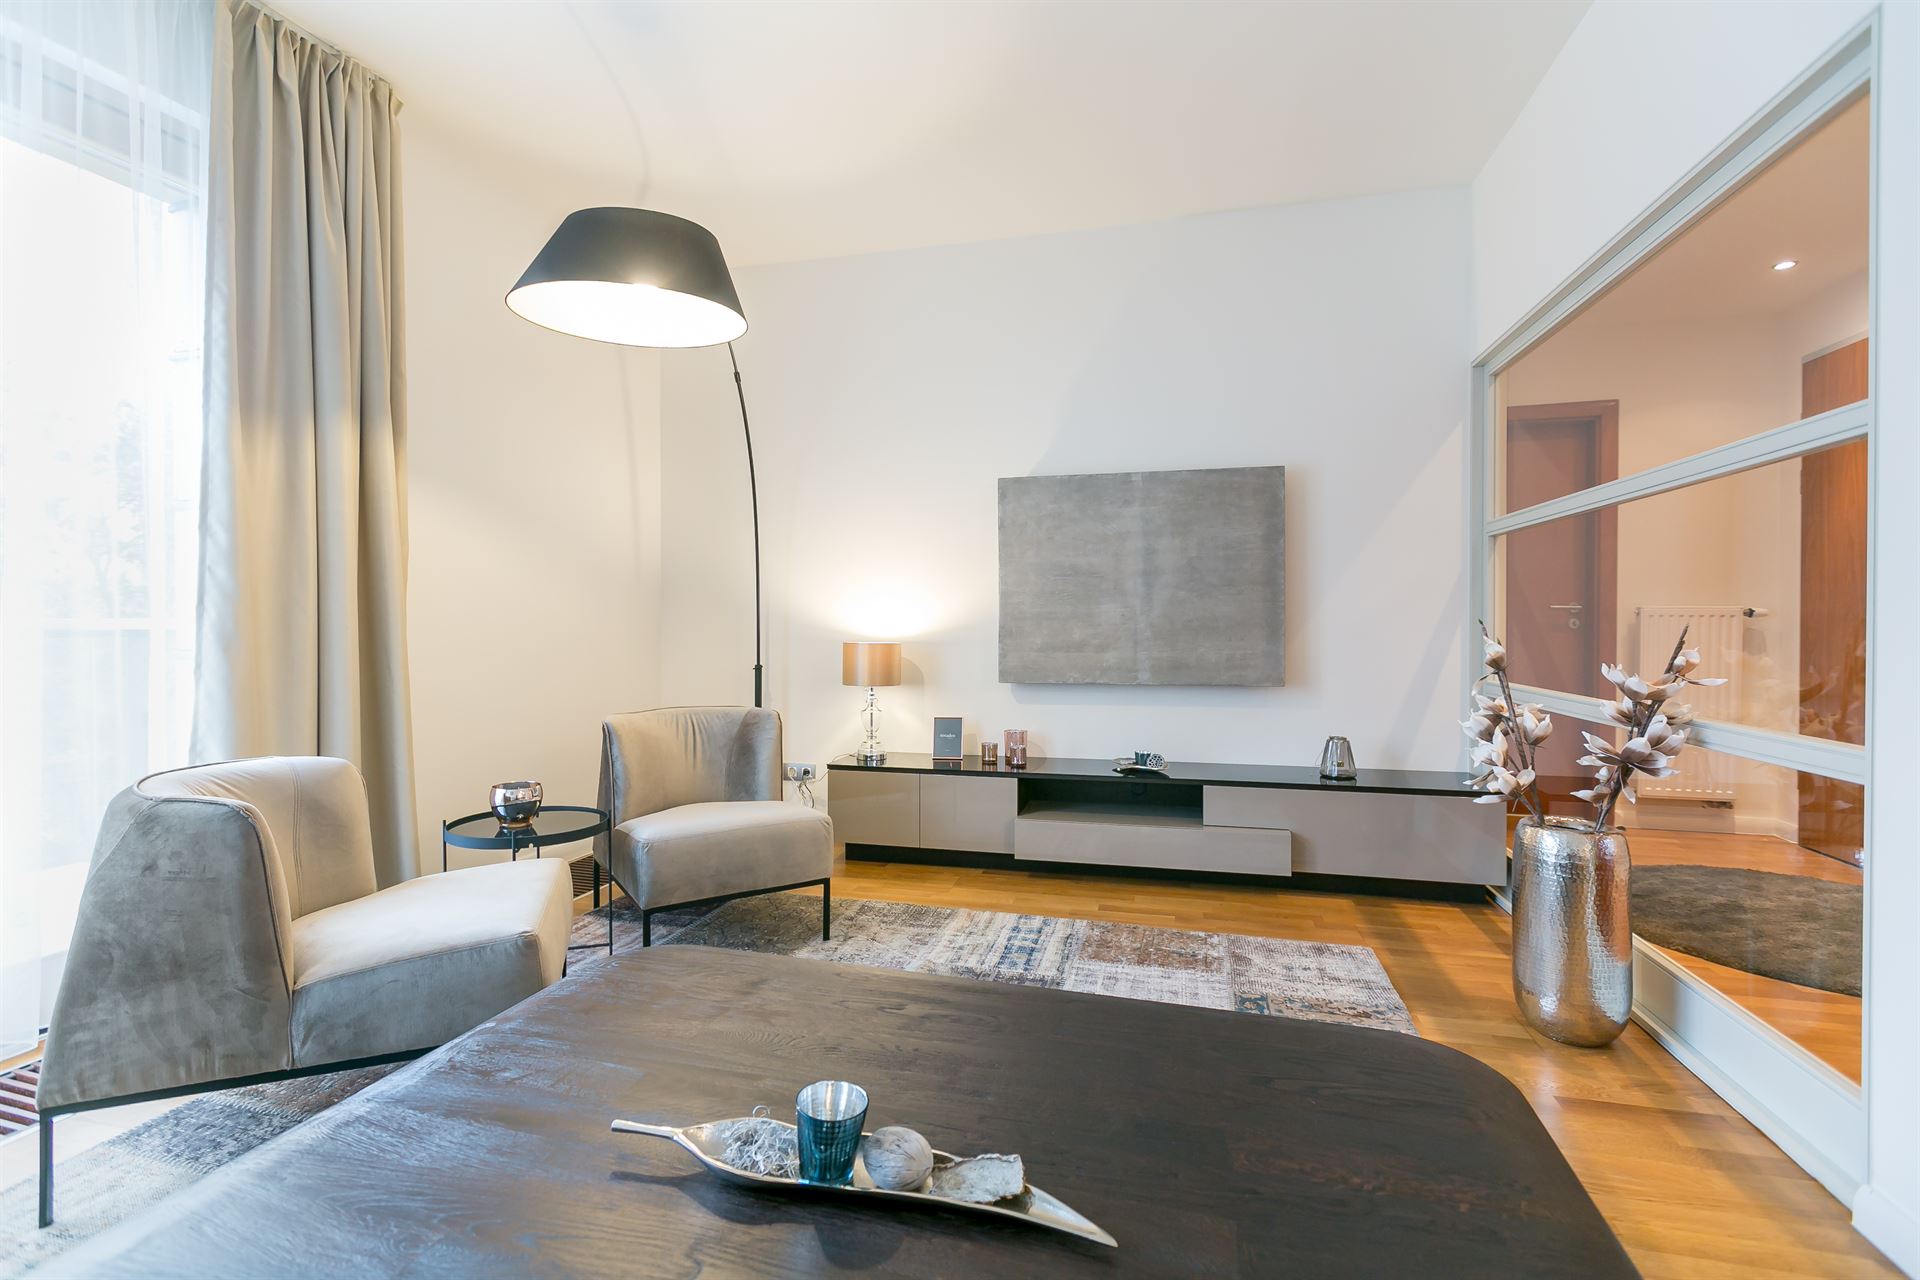 budapest-rental-long-term-lease-luxury-1-bedroom-apartment-with-view-flatrental-budapest-castle-district-19